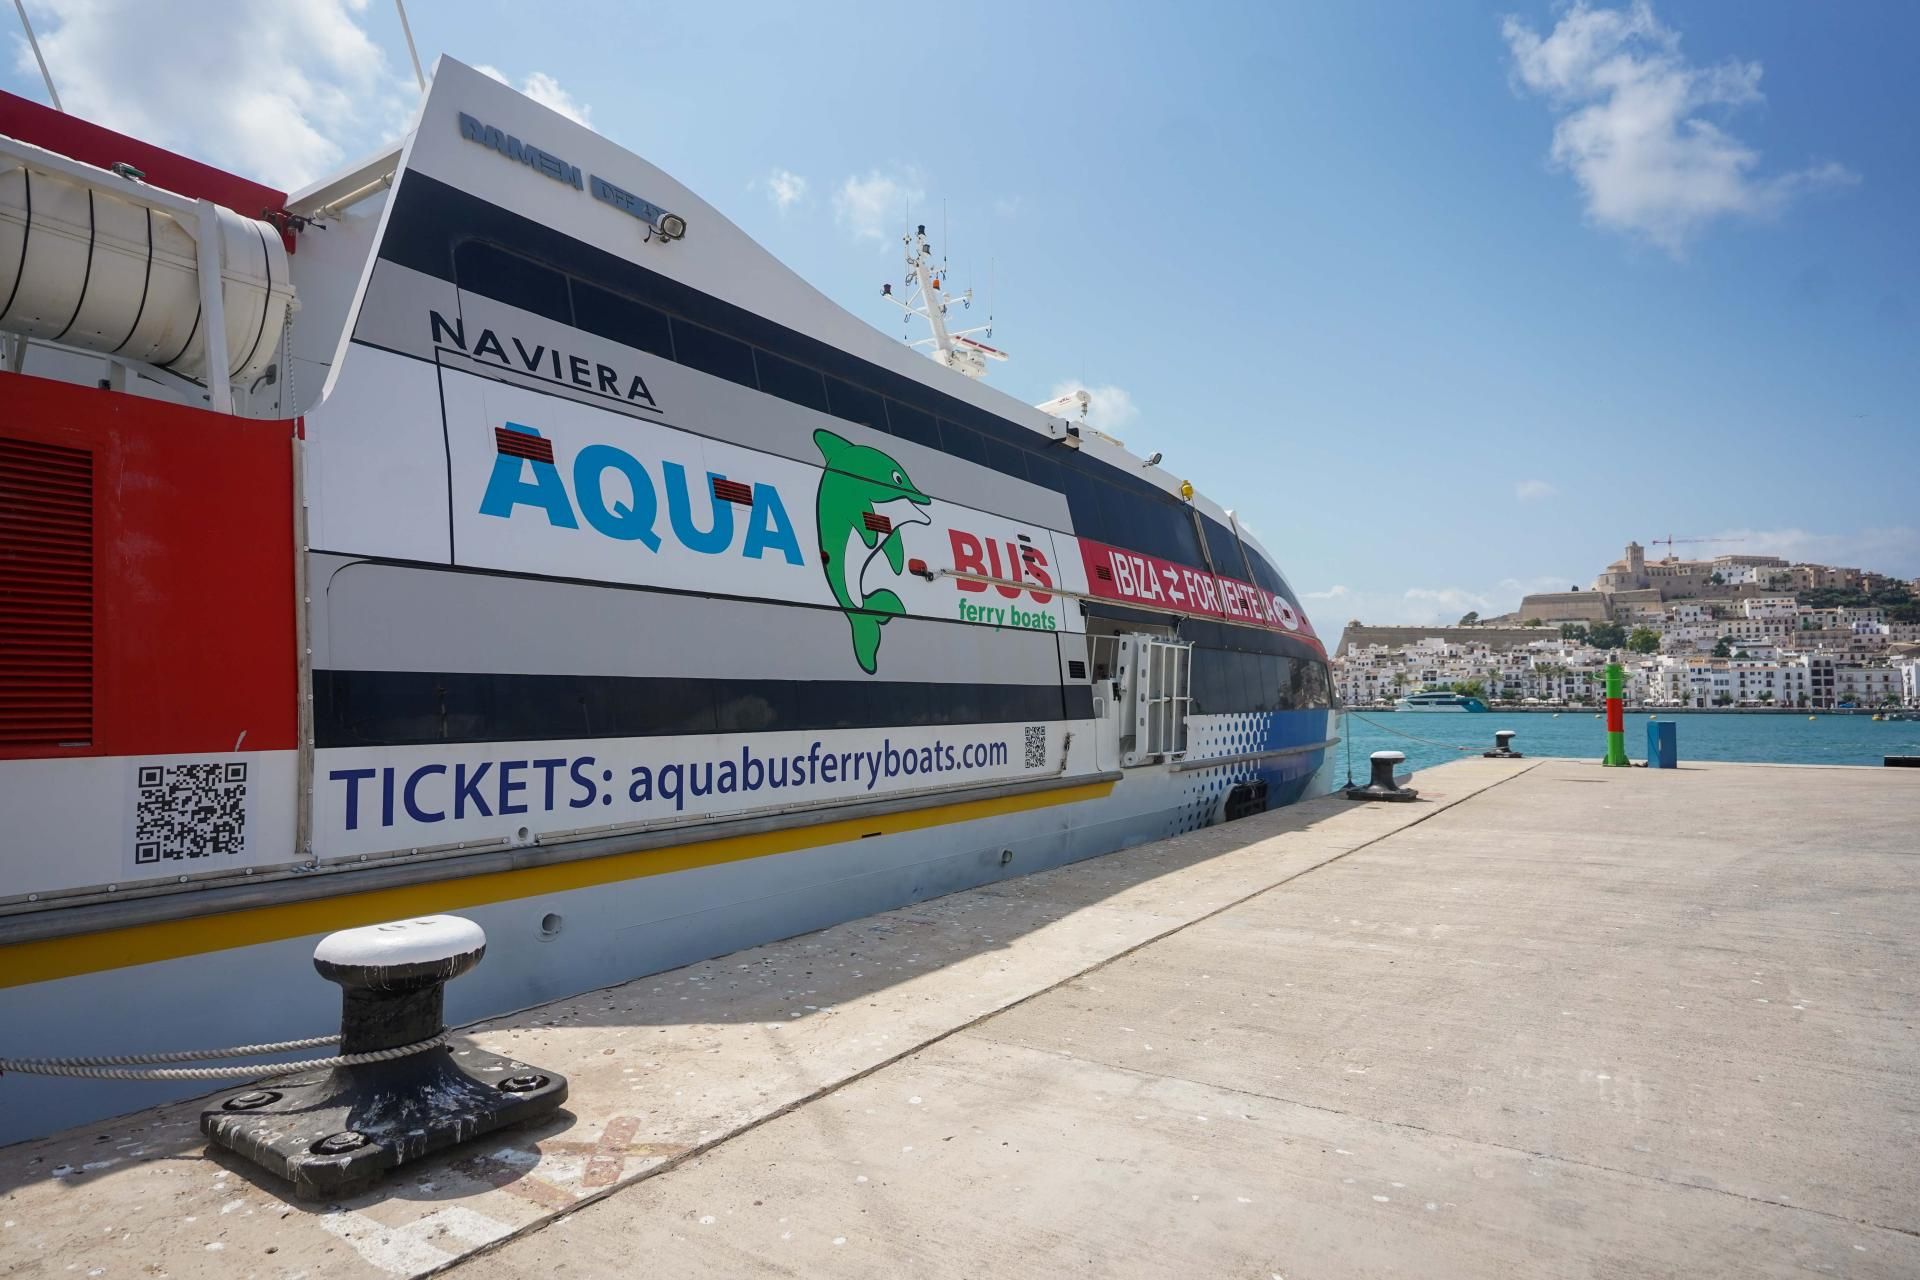 Aquabus Jet revolutionizes its fleet with two new state-of-the-art vessels